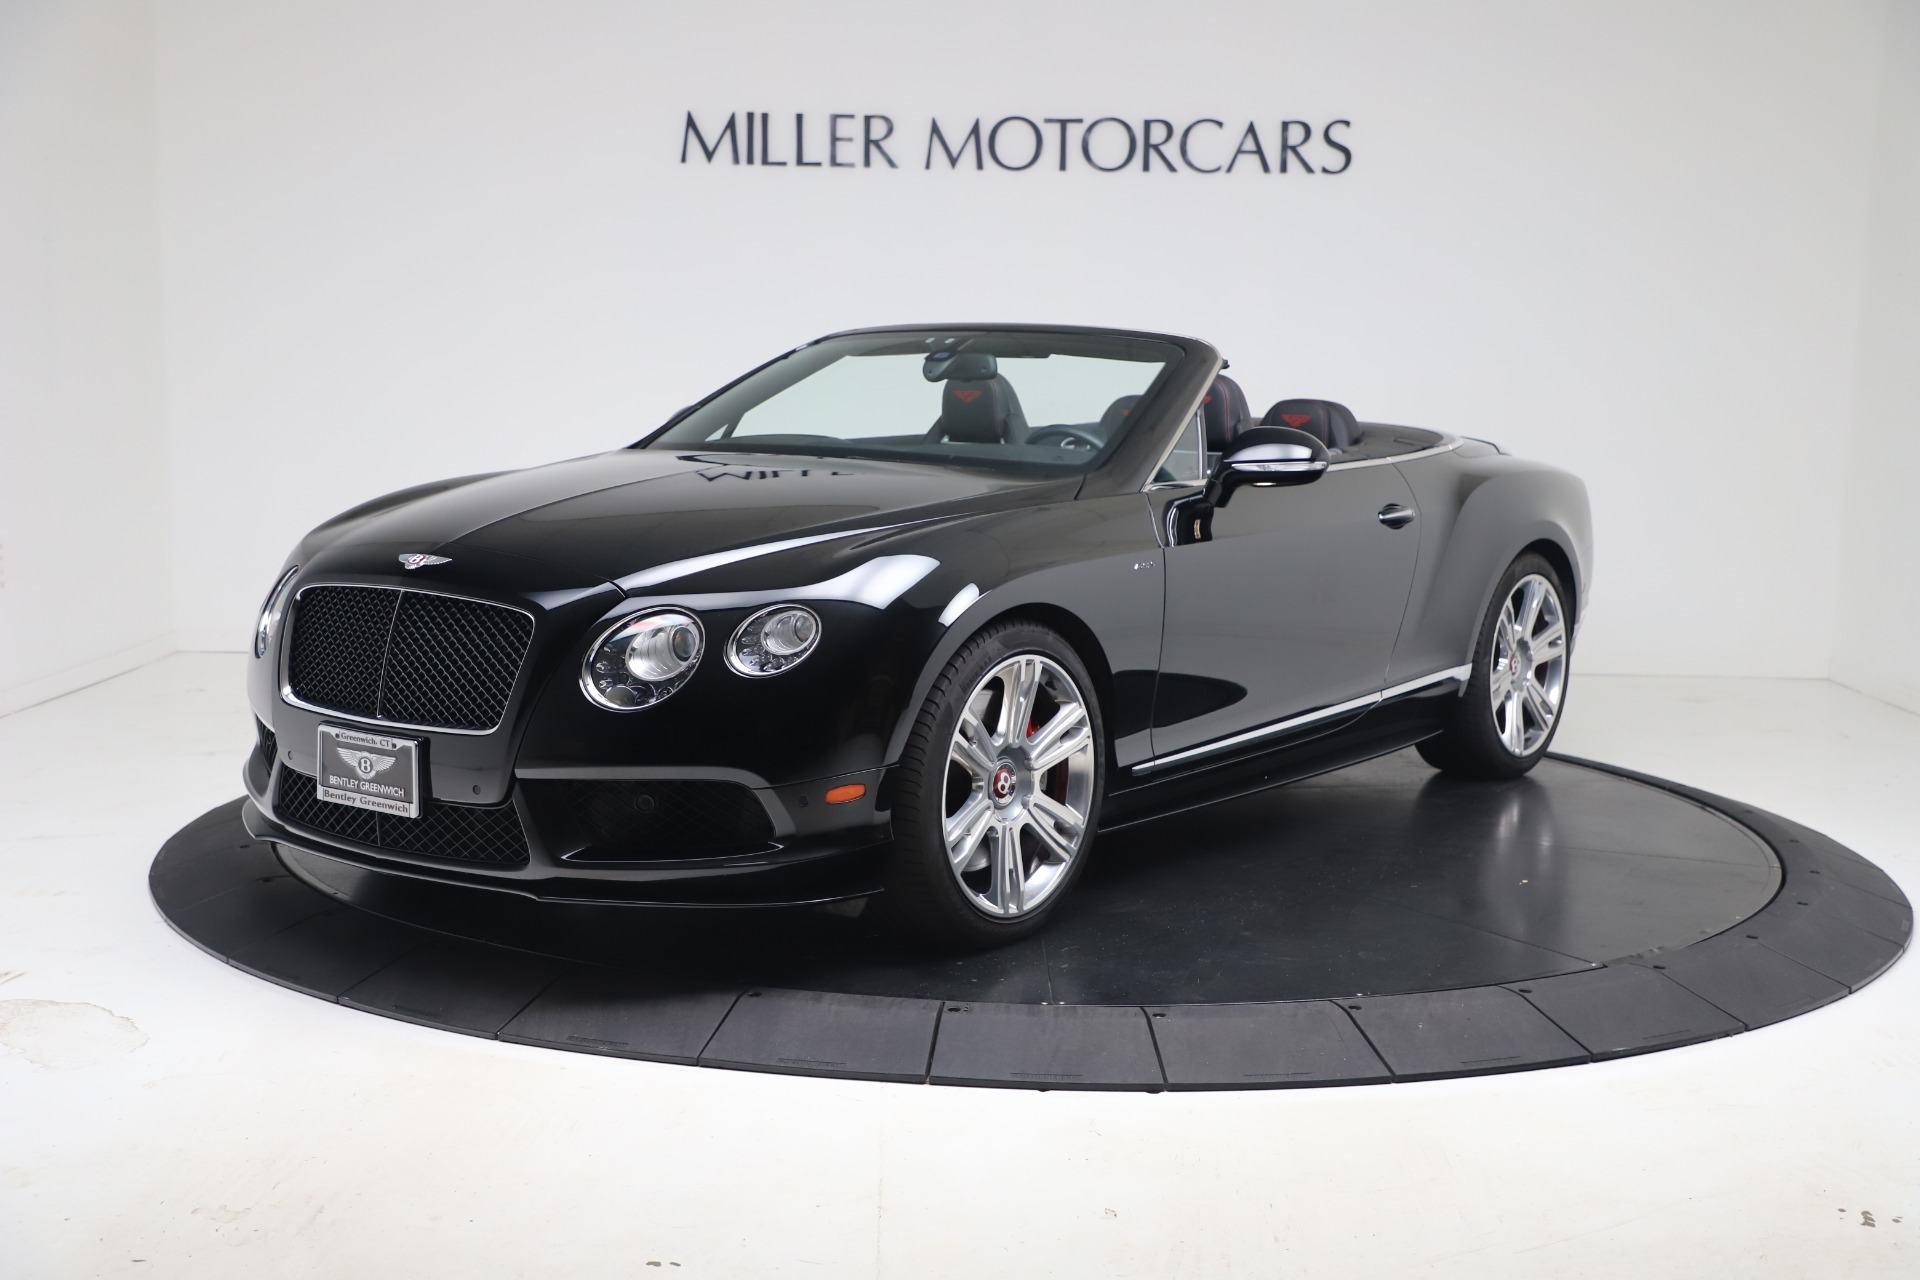 Used 2014 Bentley Continental GT V8 S for sale Sold at Bugatti of Greenwich in Greenwich CT 06830 1